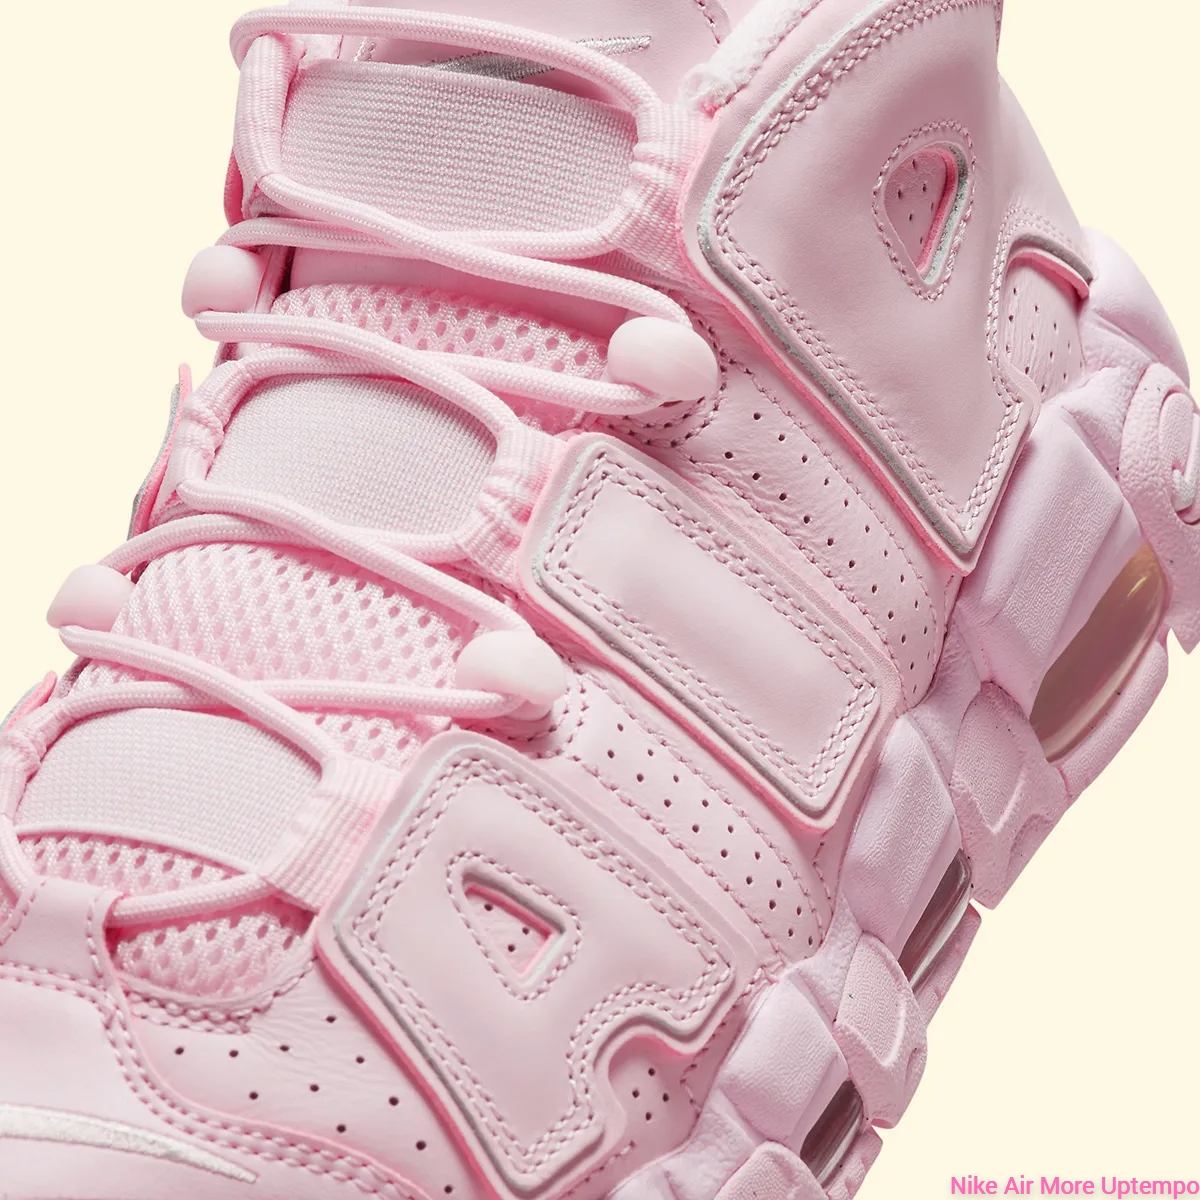 Nike Air More Uptempo laces